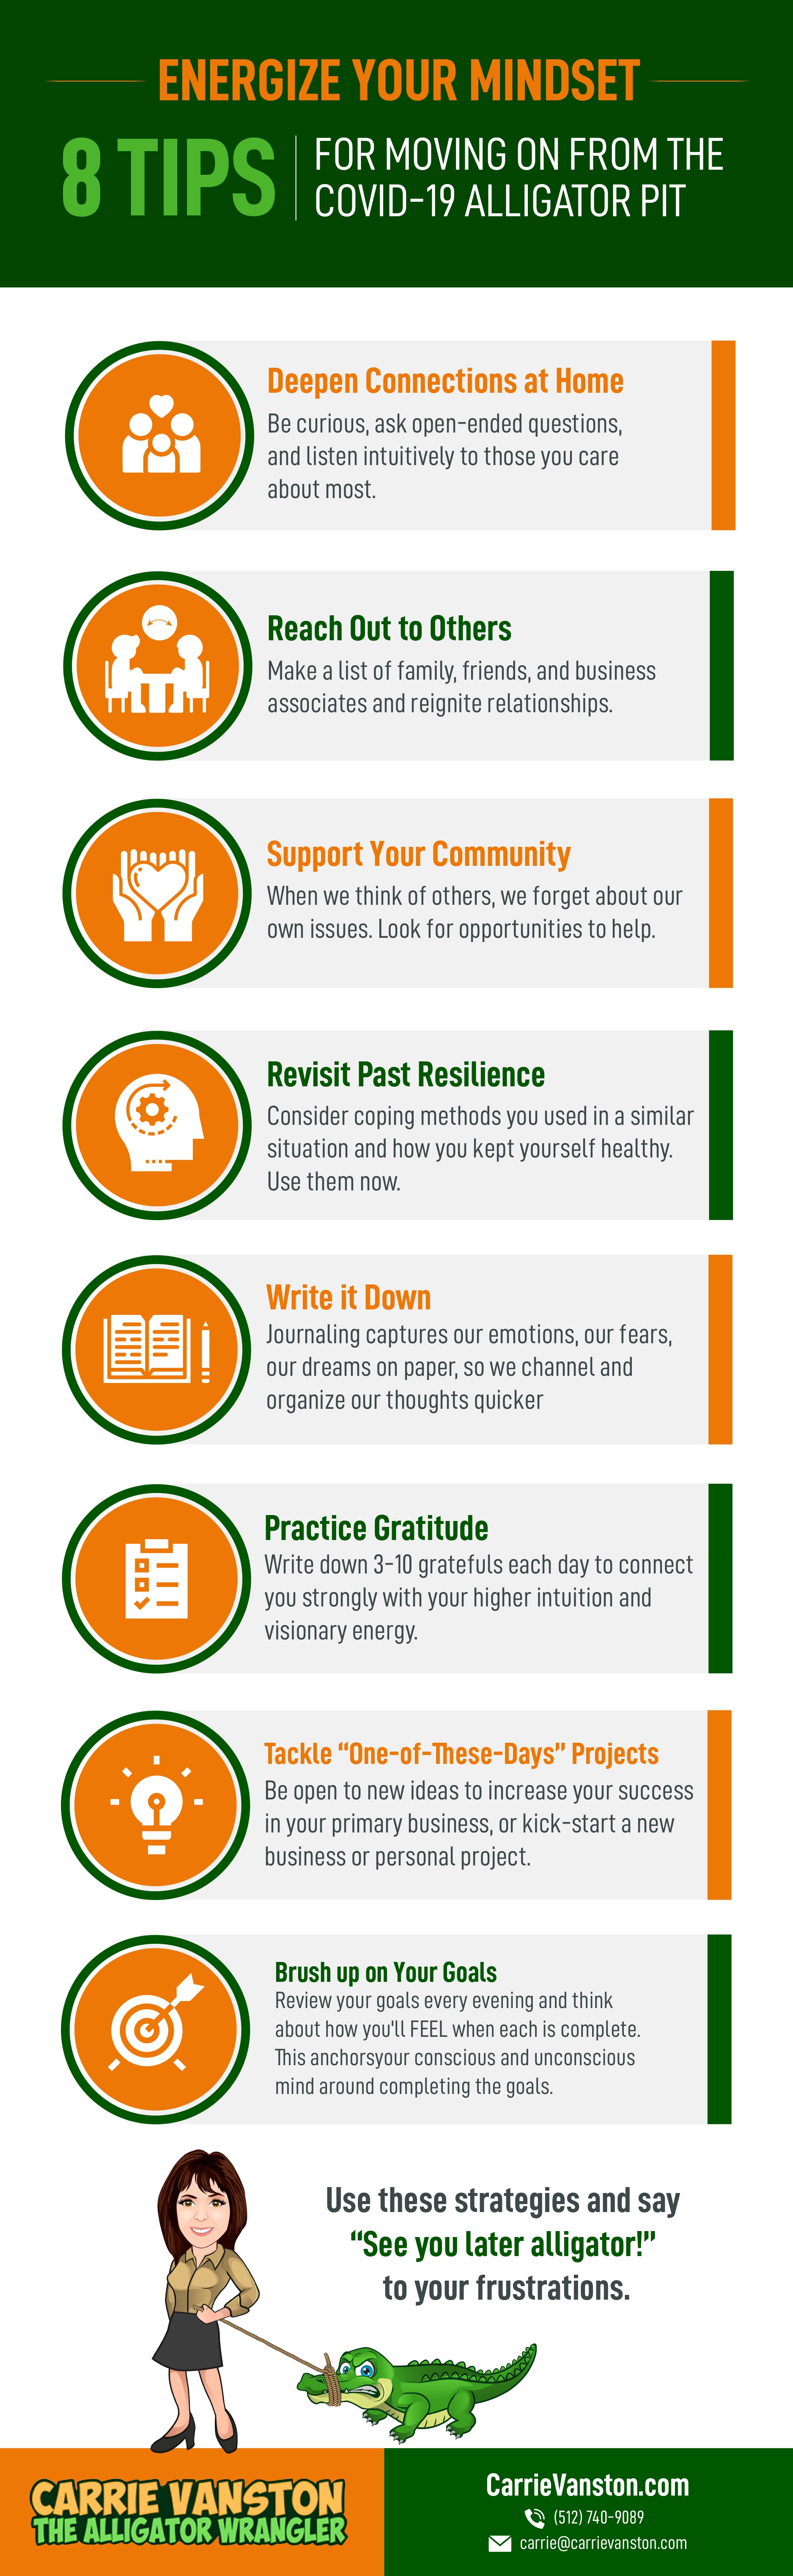 Energize Your Mindset - 8 Tips for Moving On from the COVID-19 Aligator Pit Infograph